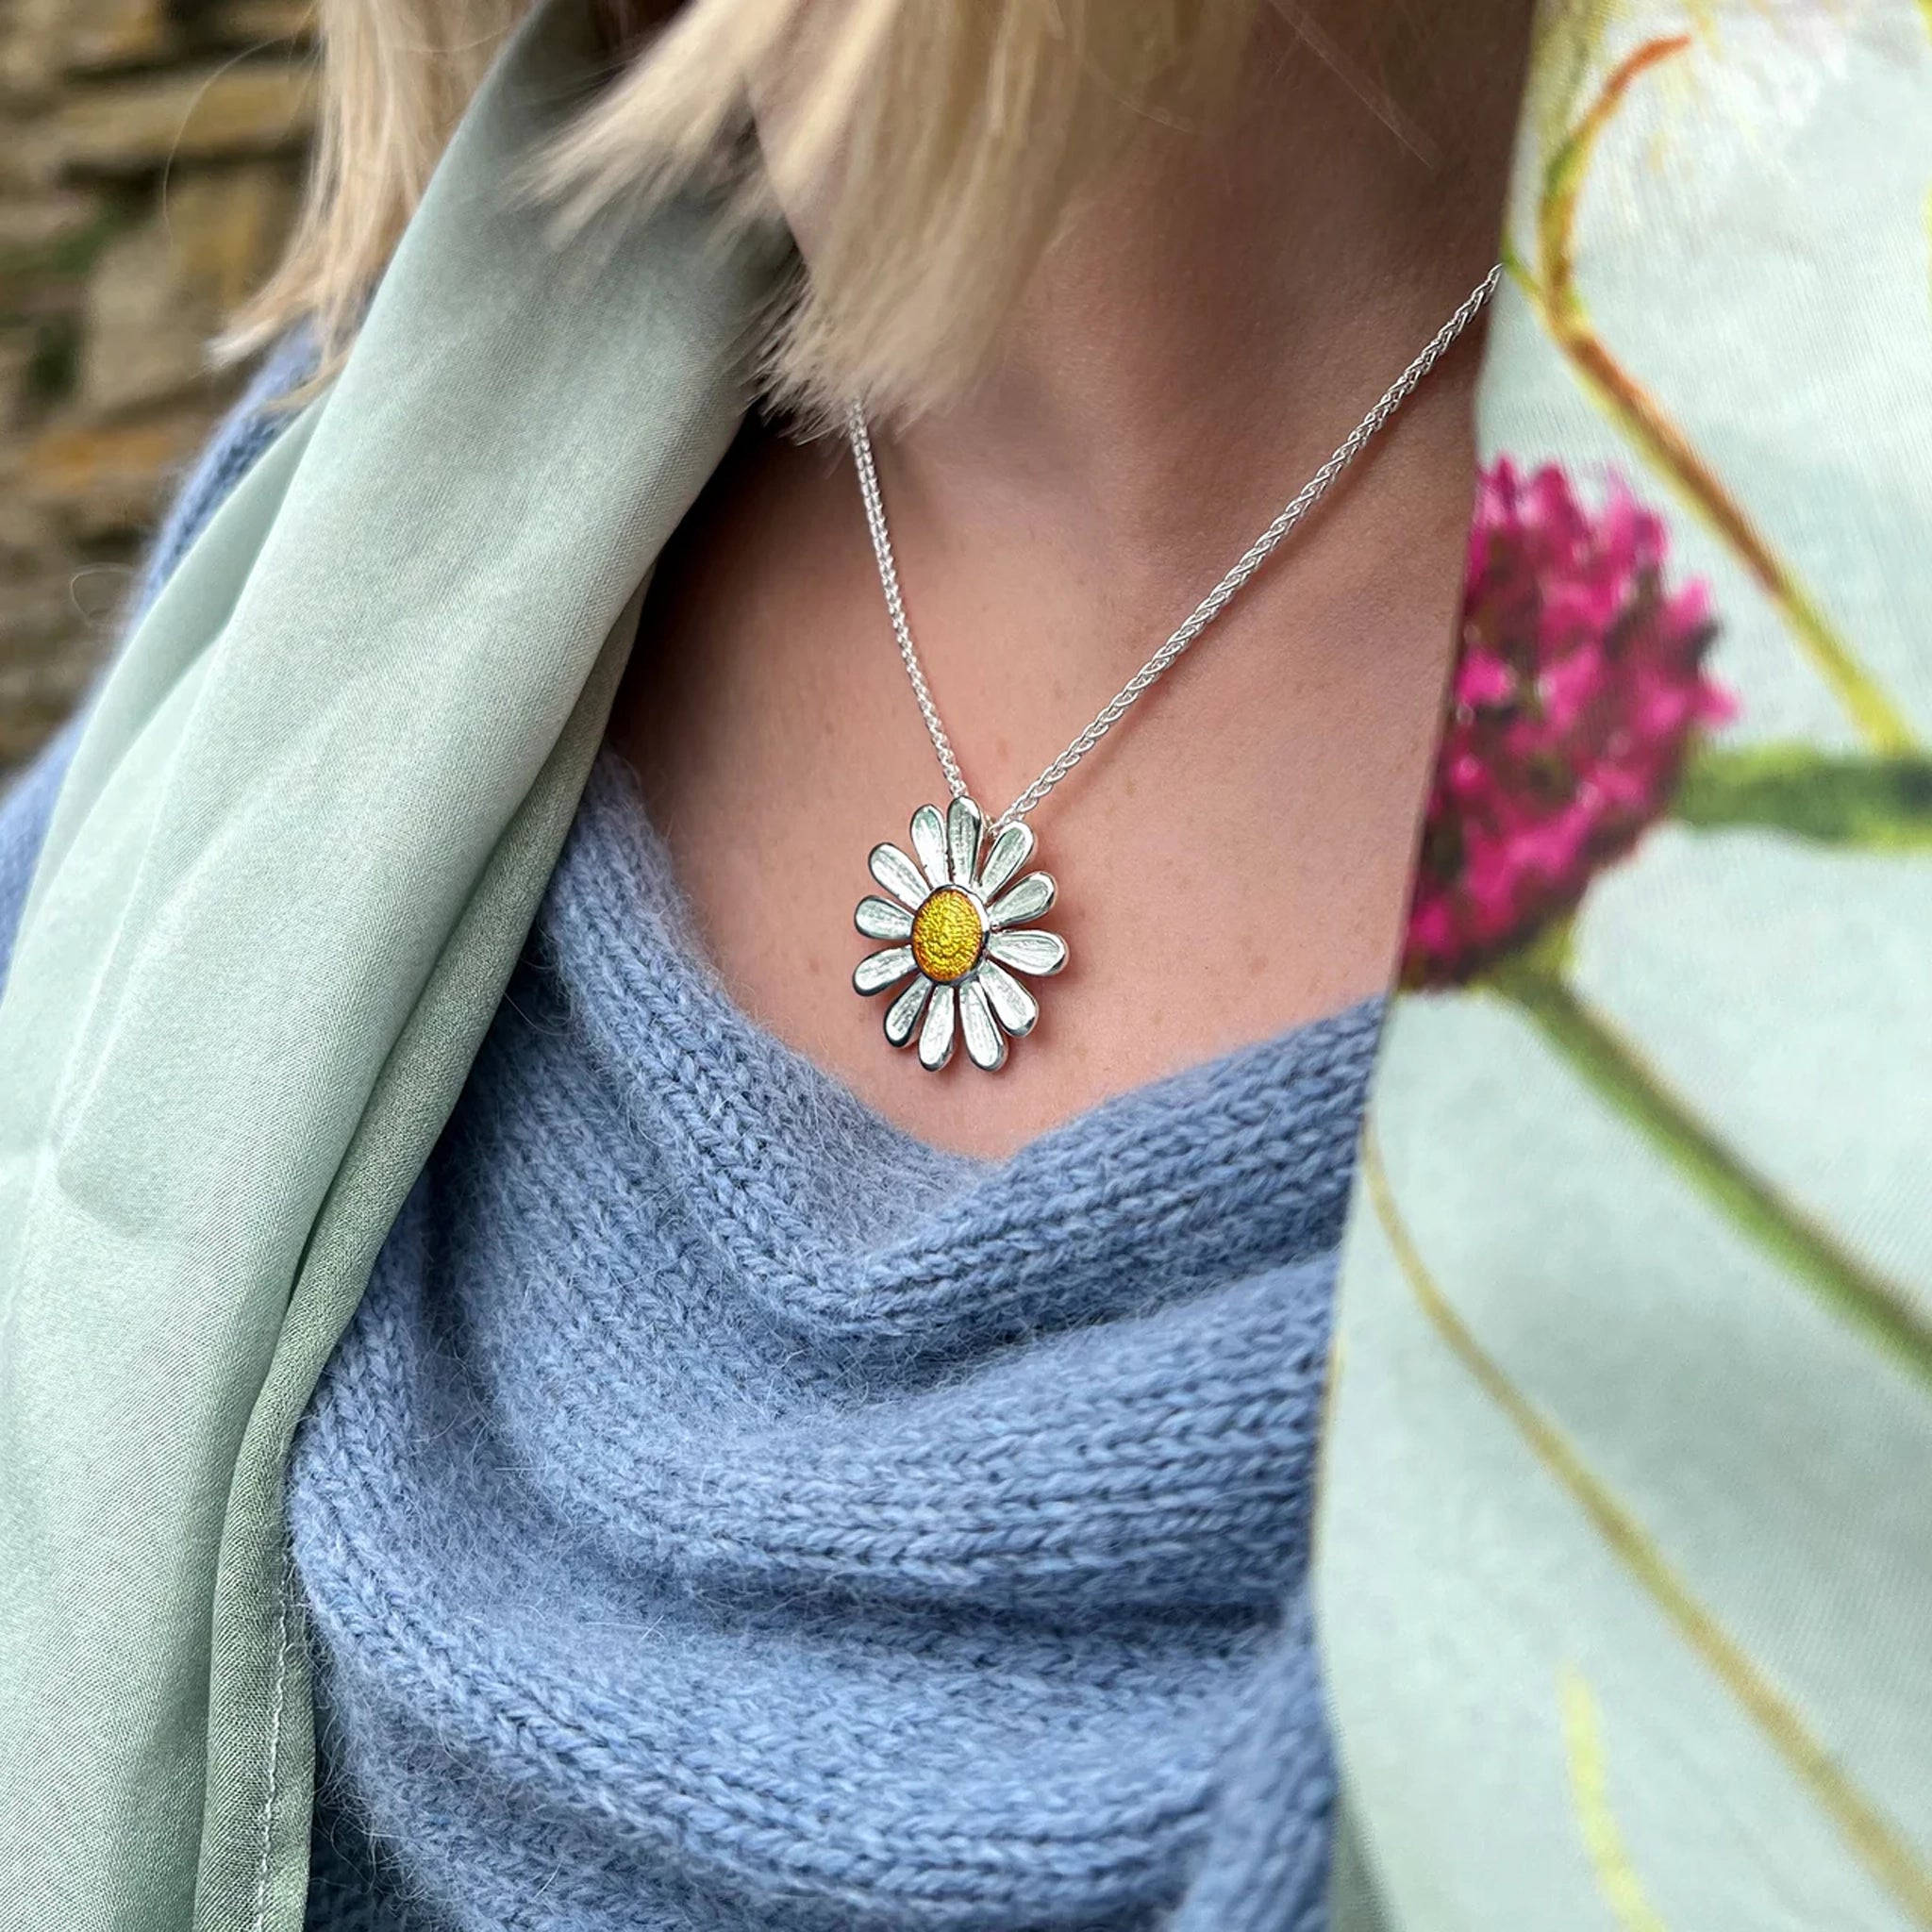 Model wearing a polished silver large daisy pendant in yellow and white enamel with a silver chain